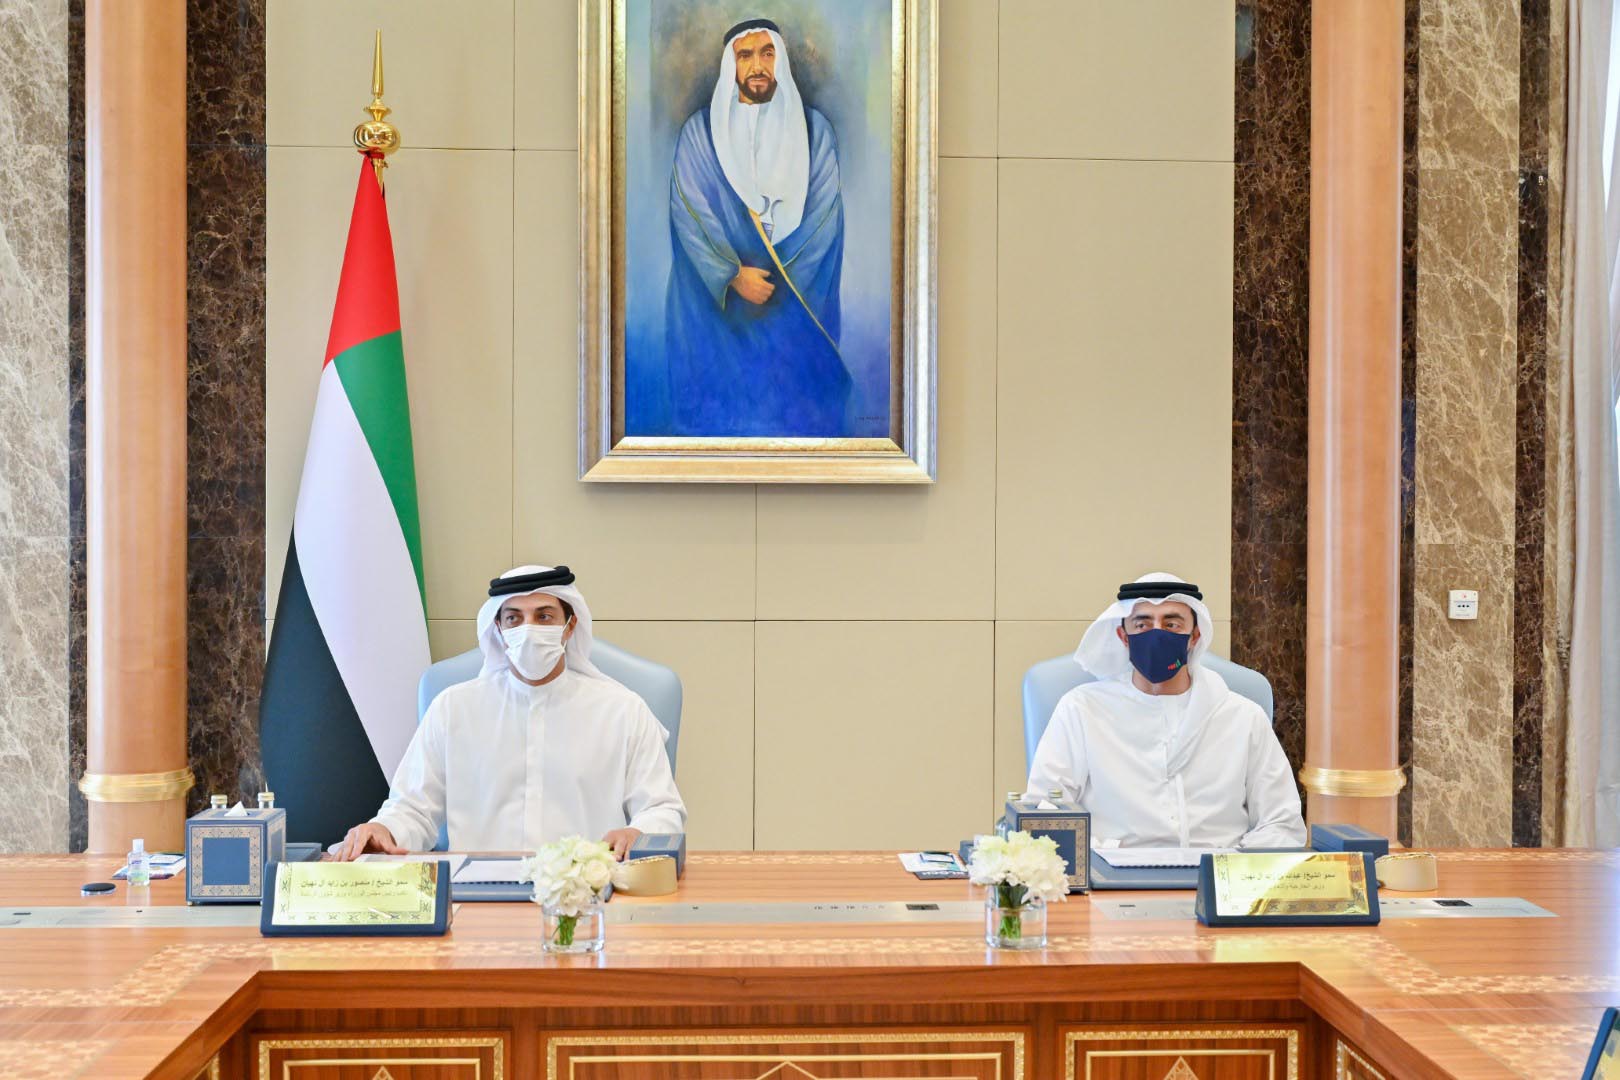 General Budget Committee meet chaired by Sheikh Mansour